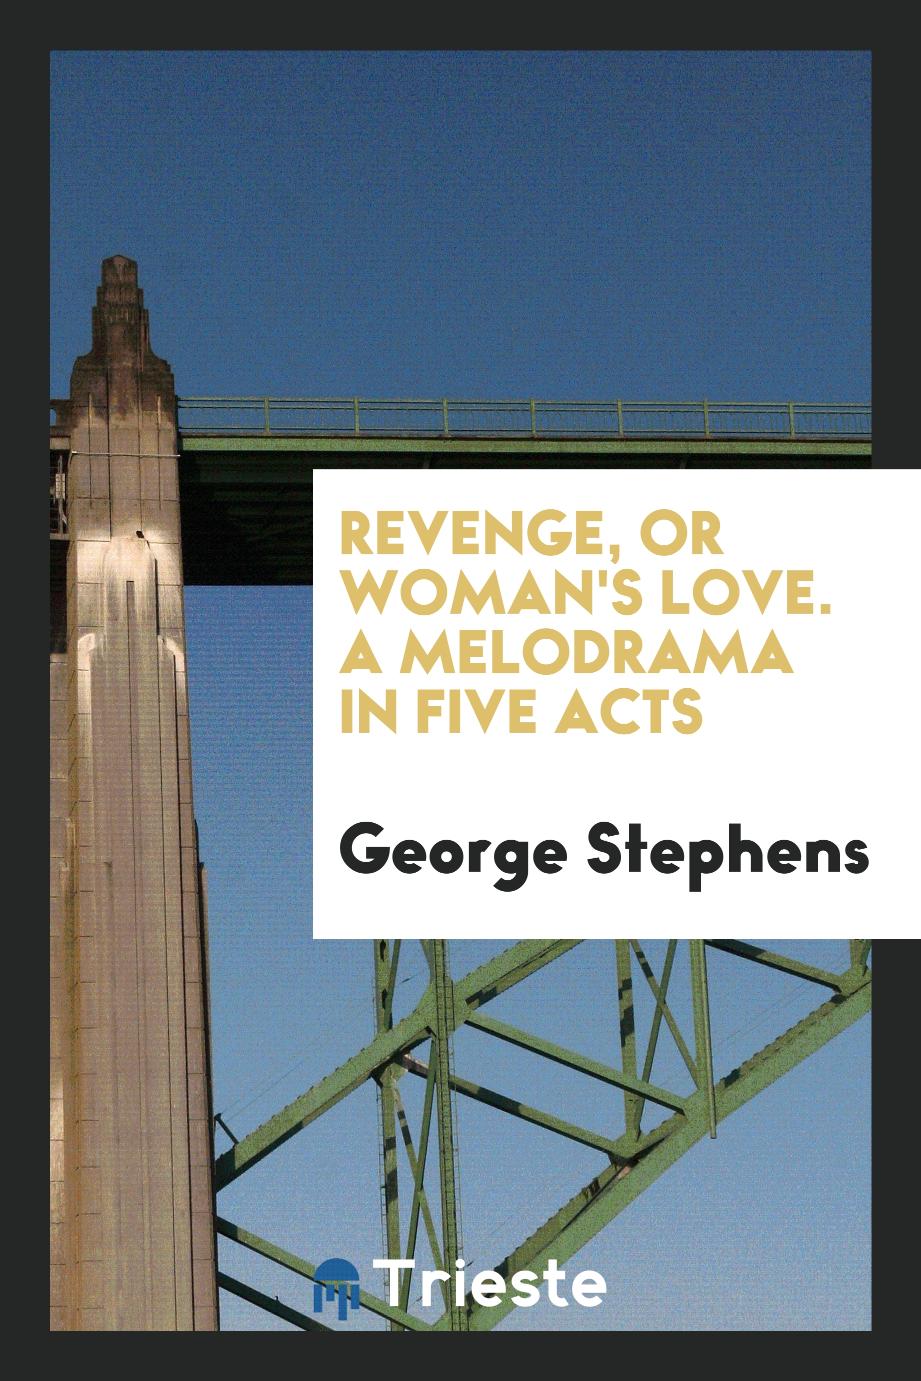 Revenge, or Woman's Love. A Melodrama in Five Acts